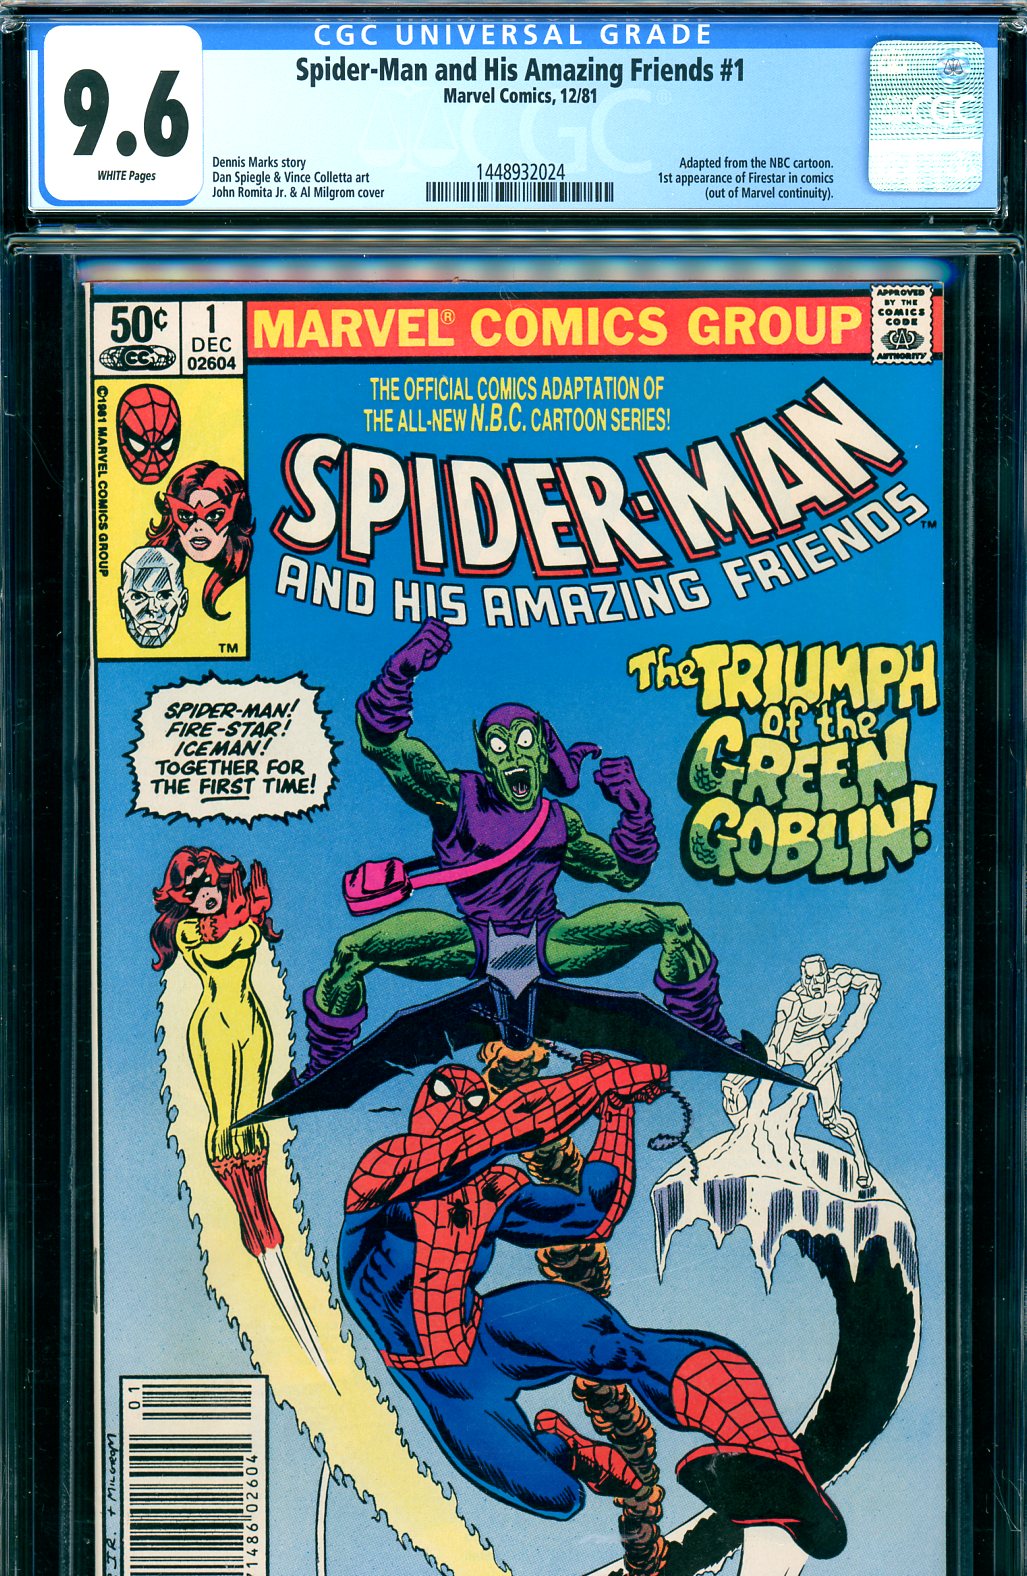 Spider-Man and His Amazing Friends #1 CGC 9.6 w Newsstand Edition